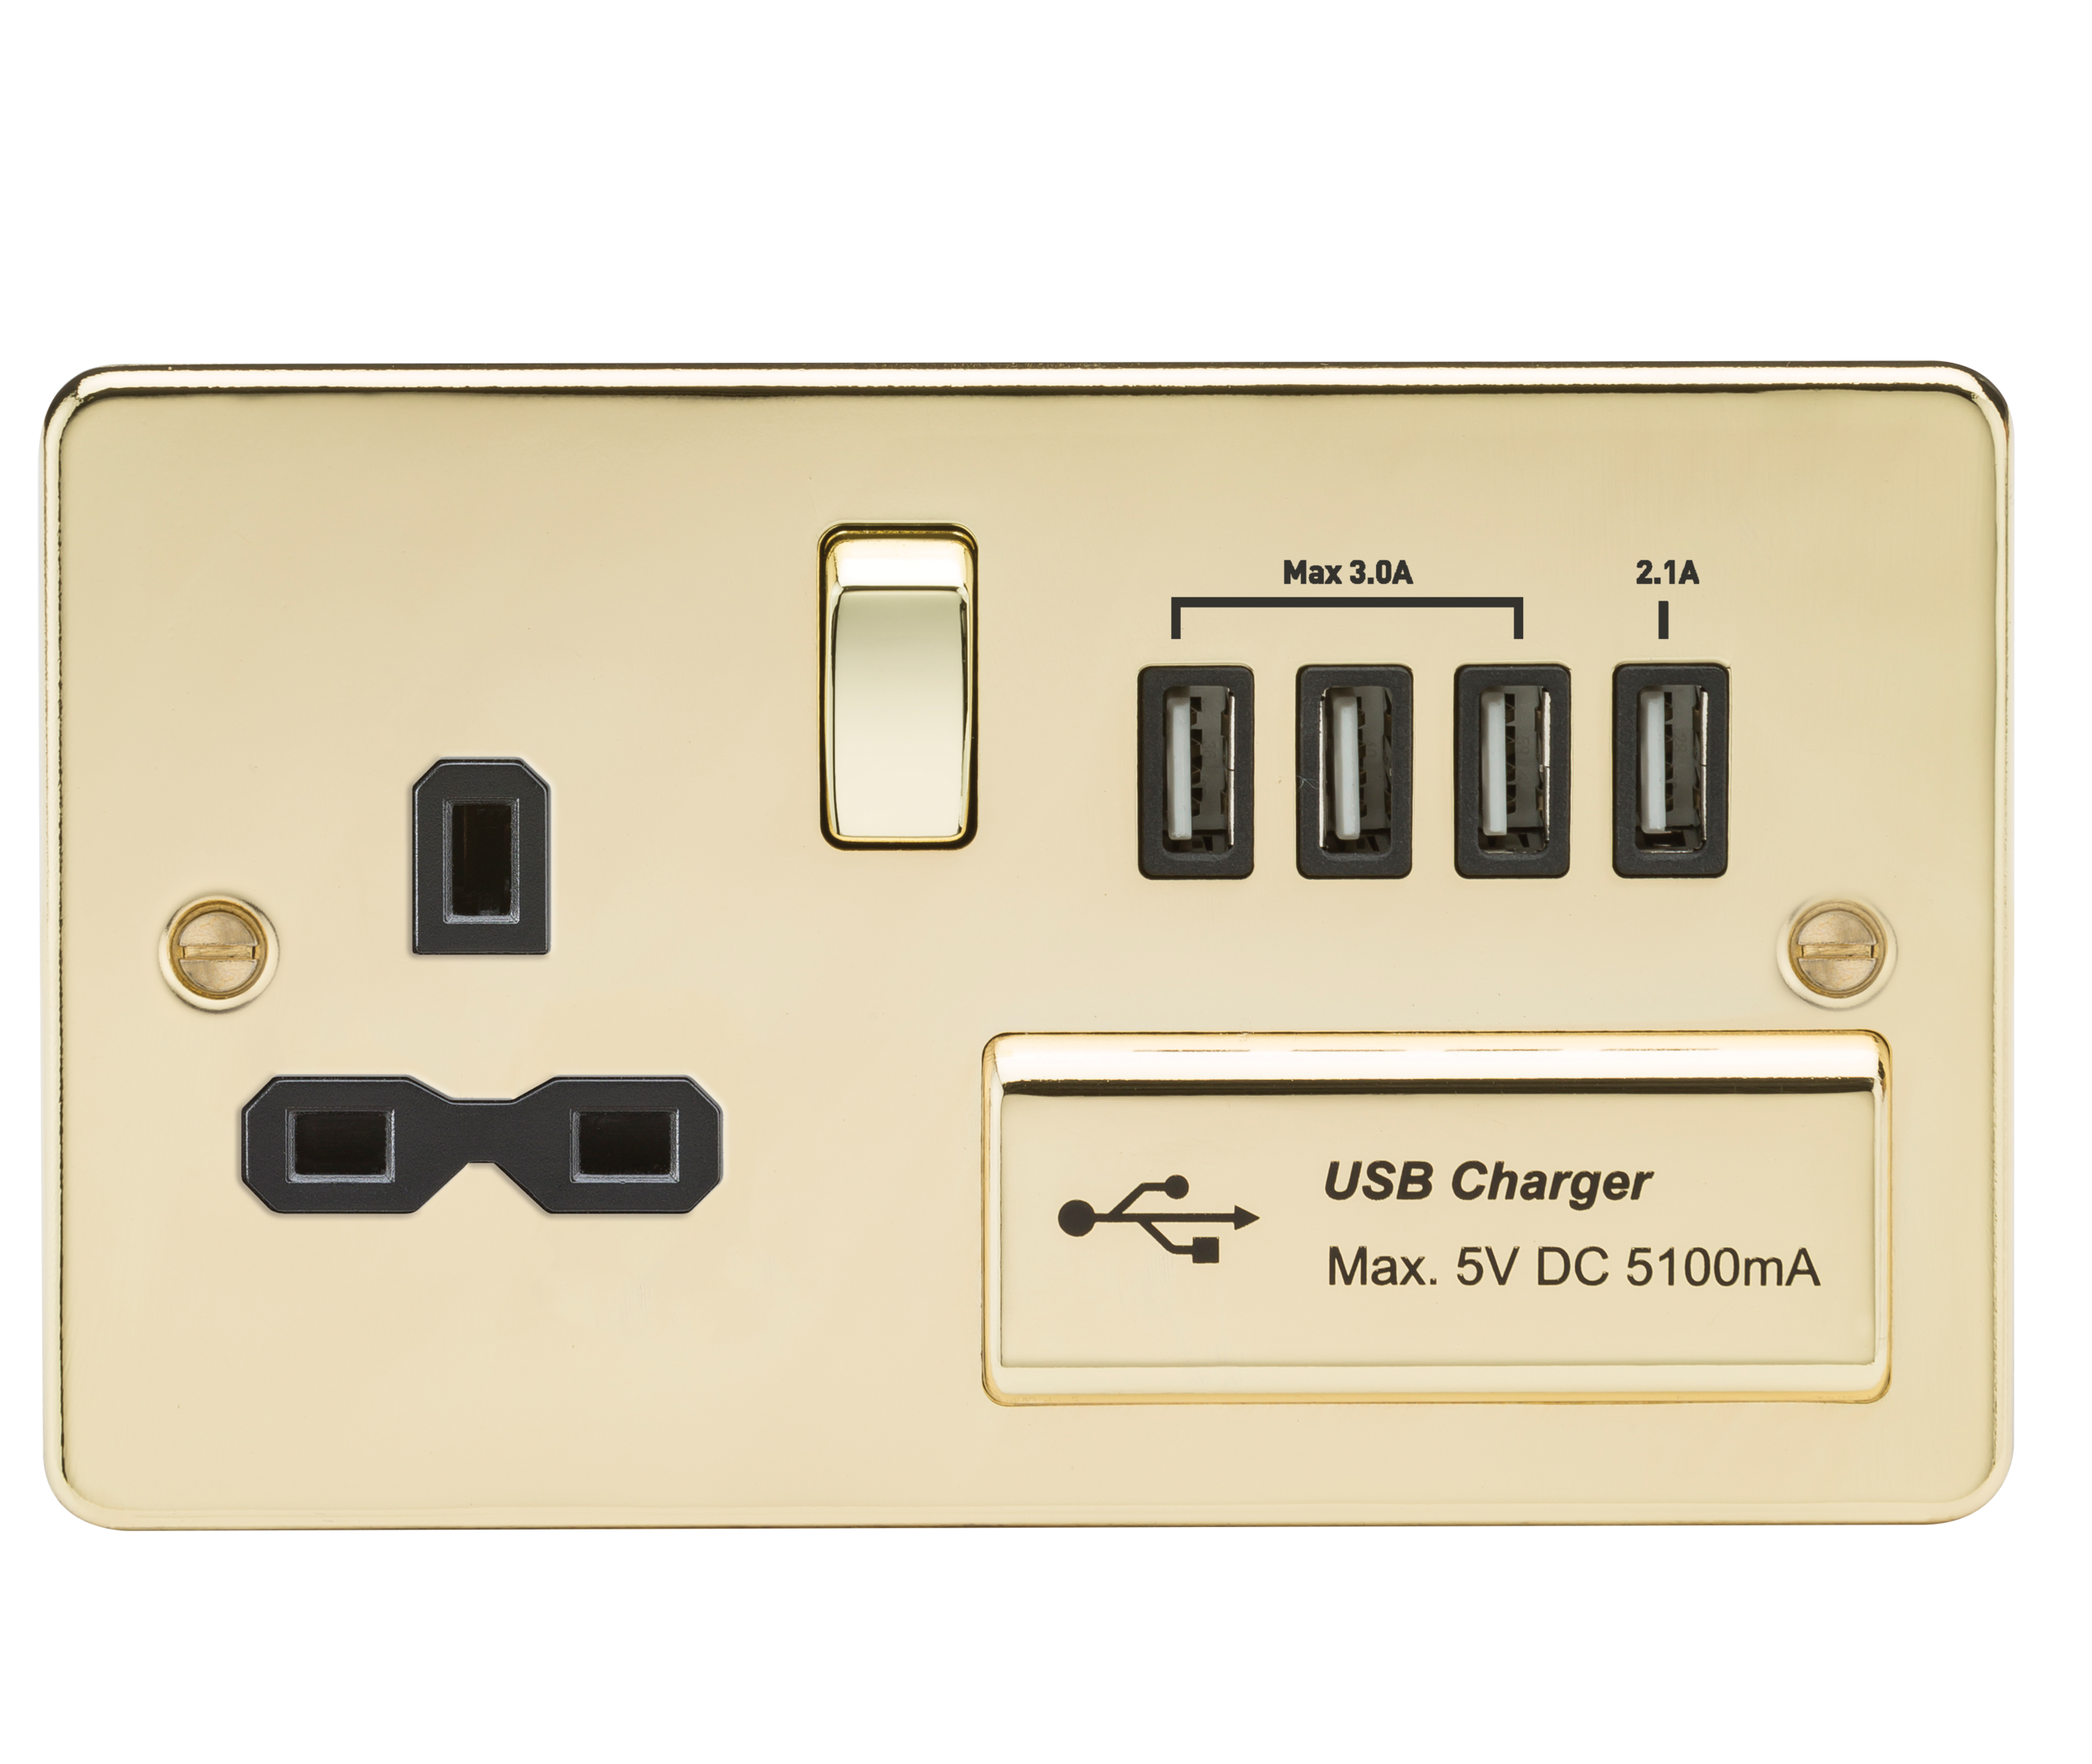 Flat Plate 13A Switched Socket With Quad USB Charger - Polished Brass With Black Insert - FPR7USB4PB 